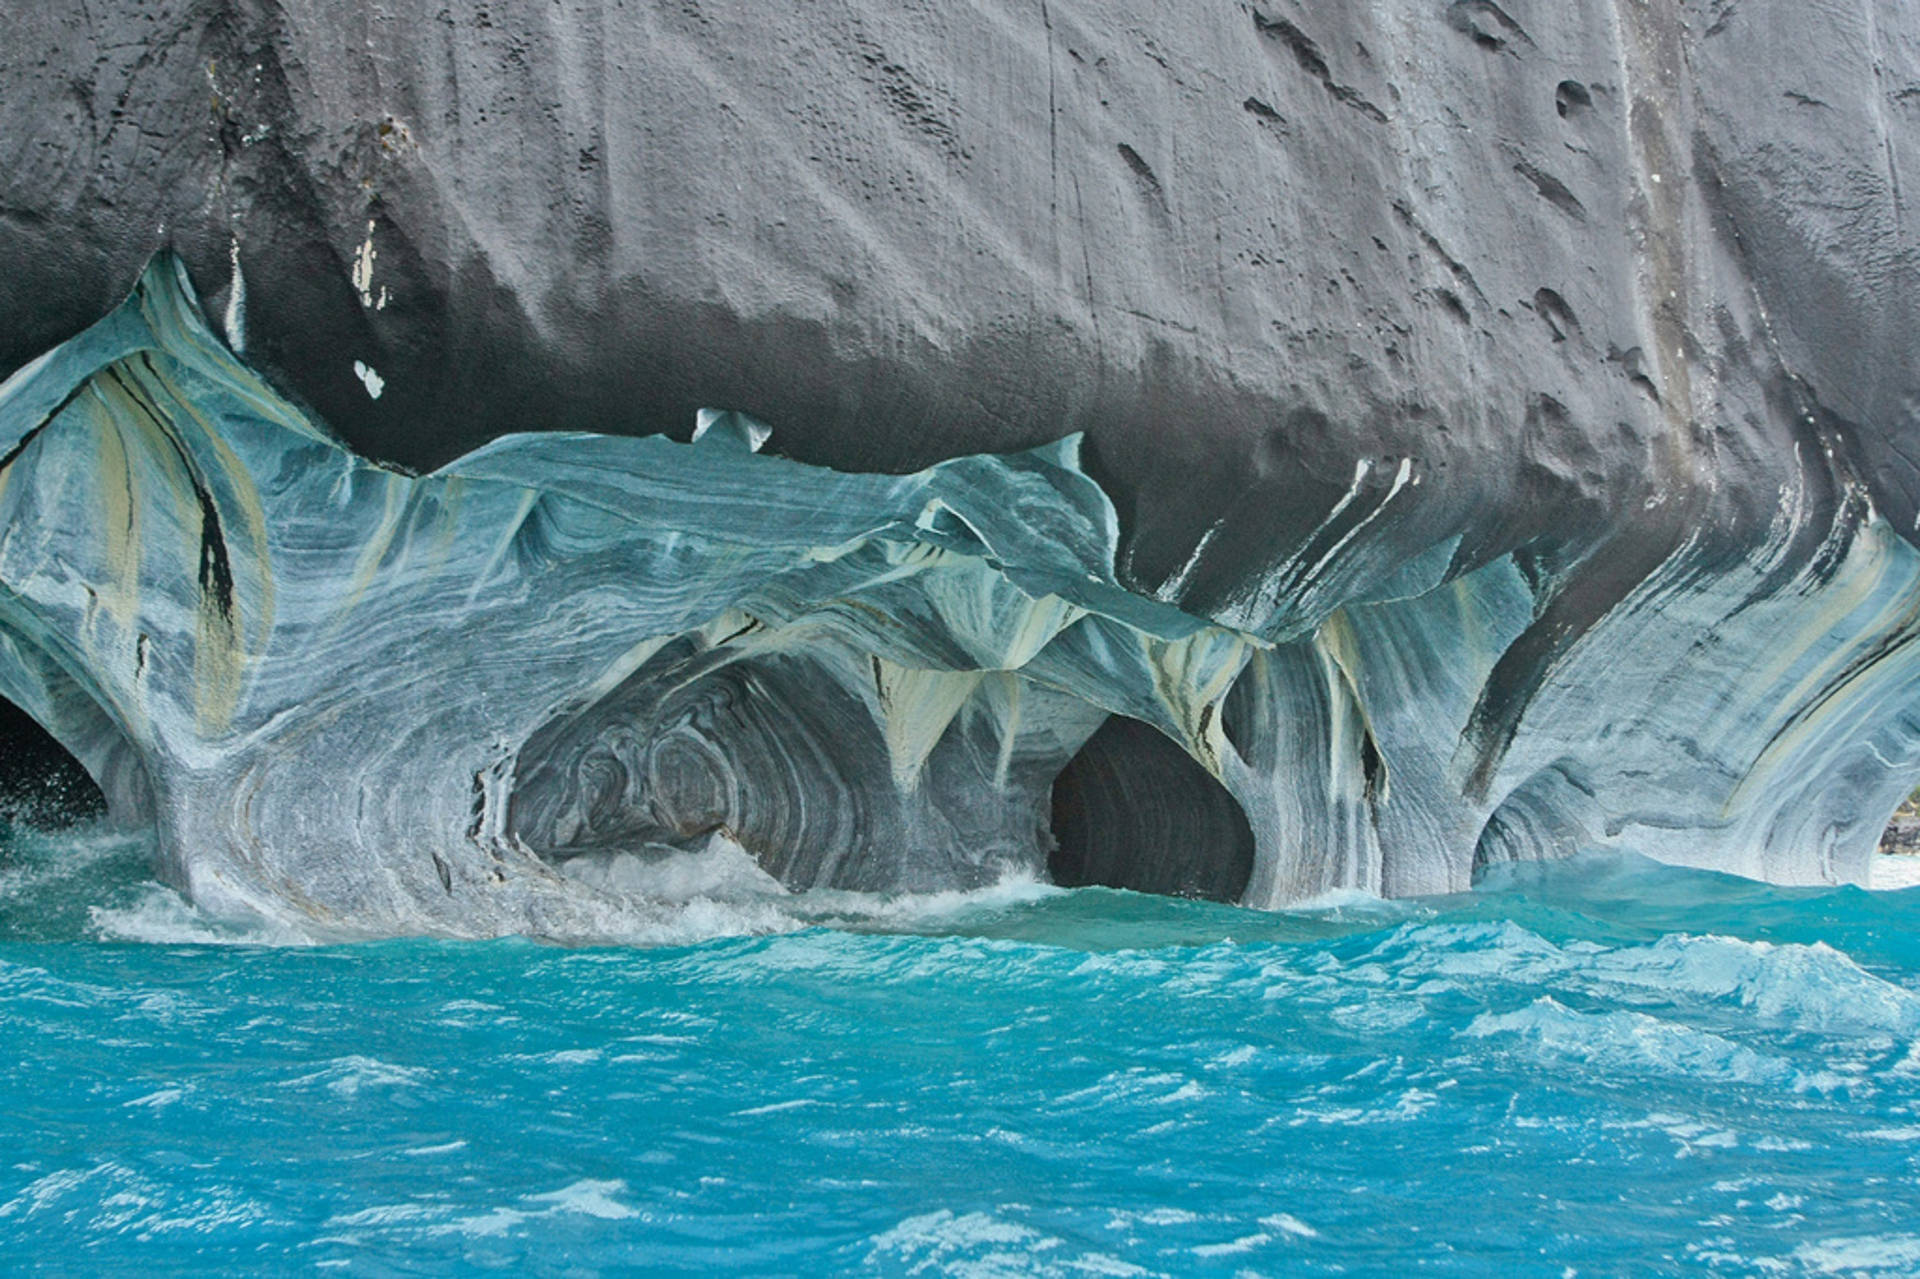 Visitors Admire The Stunning Blue And Gold Marble Formations Of Marble Caves, Chile Background